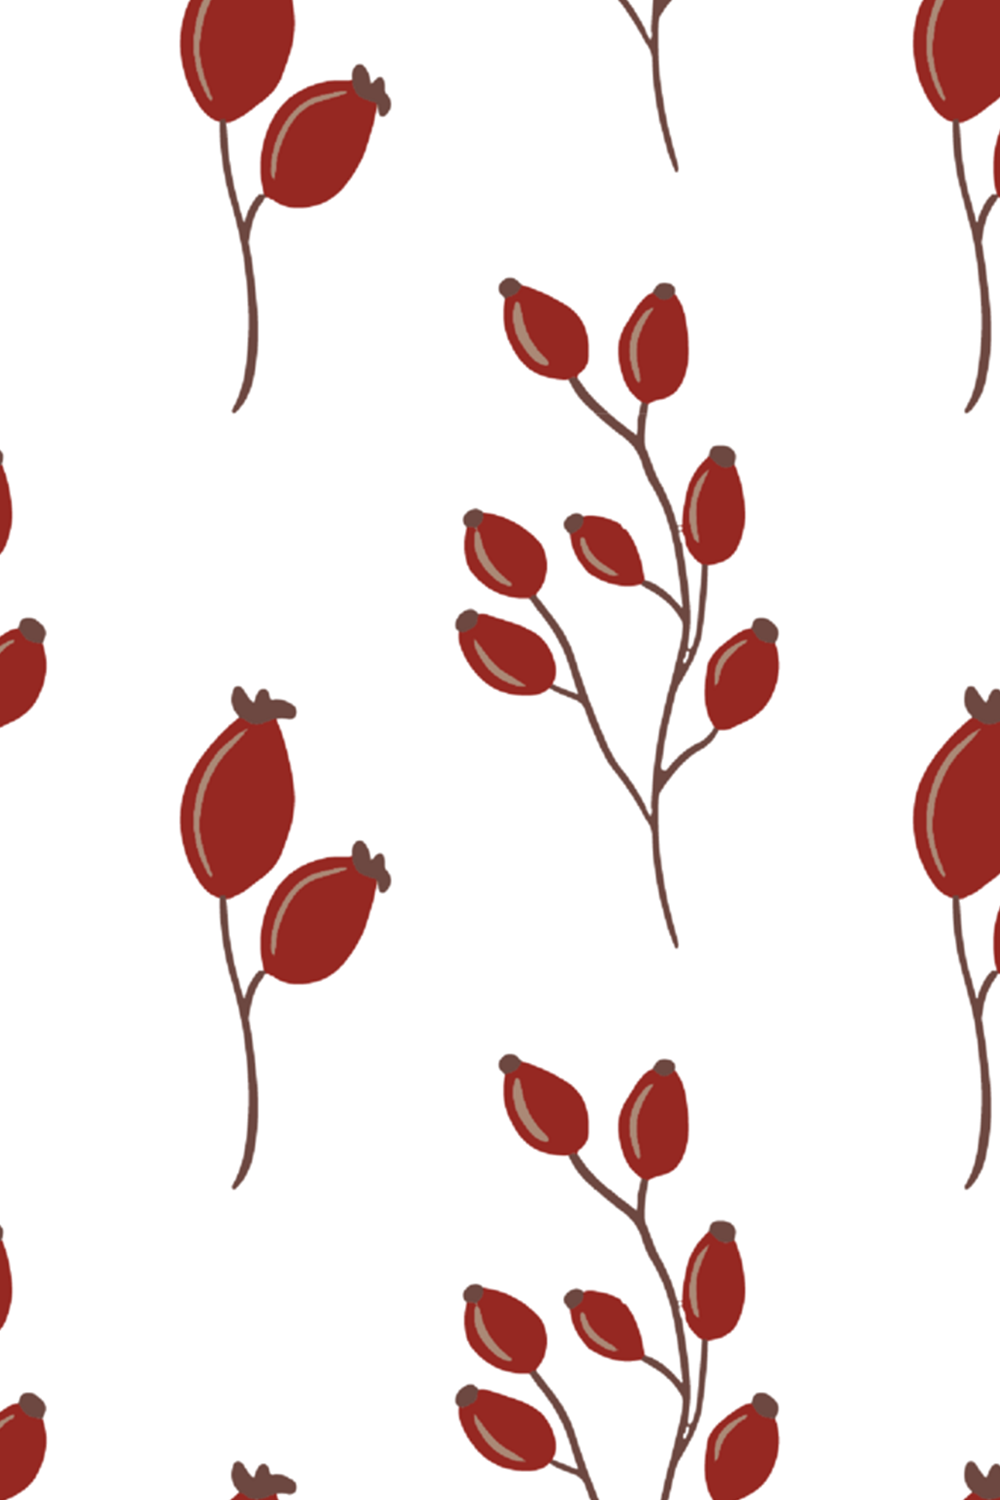 Berries and leaves pattern set pinterest preview image.